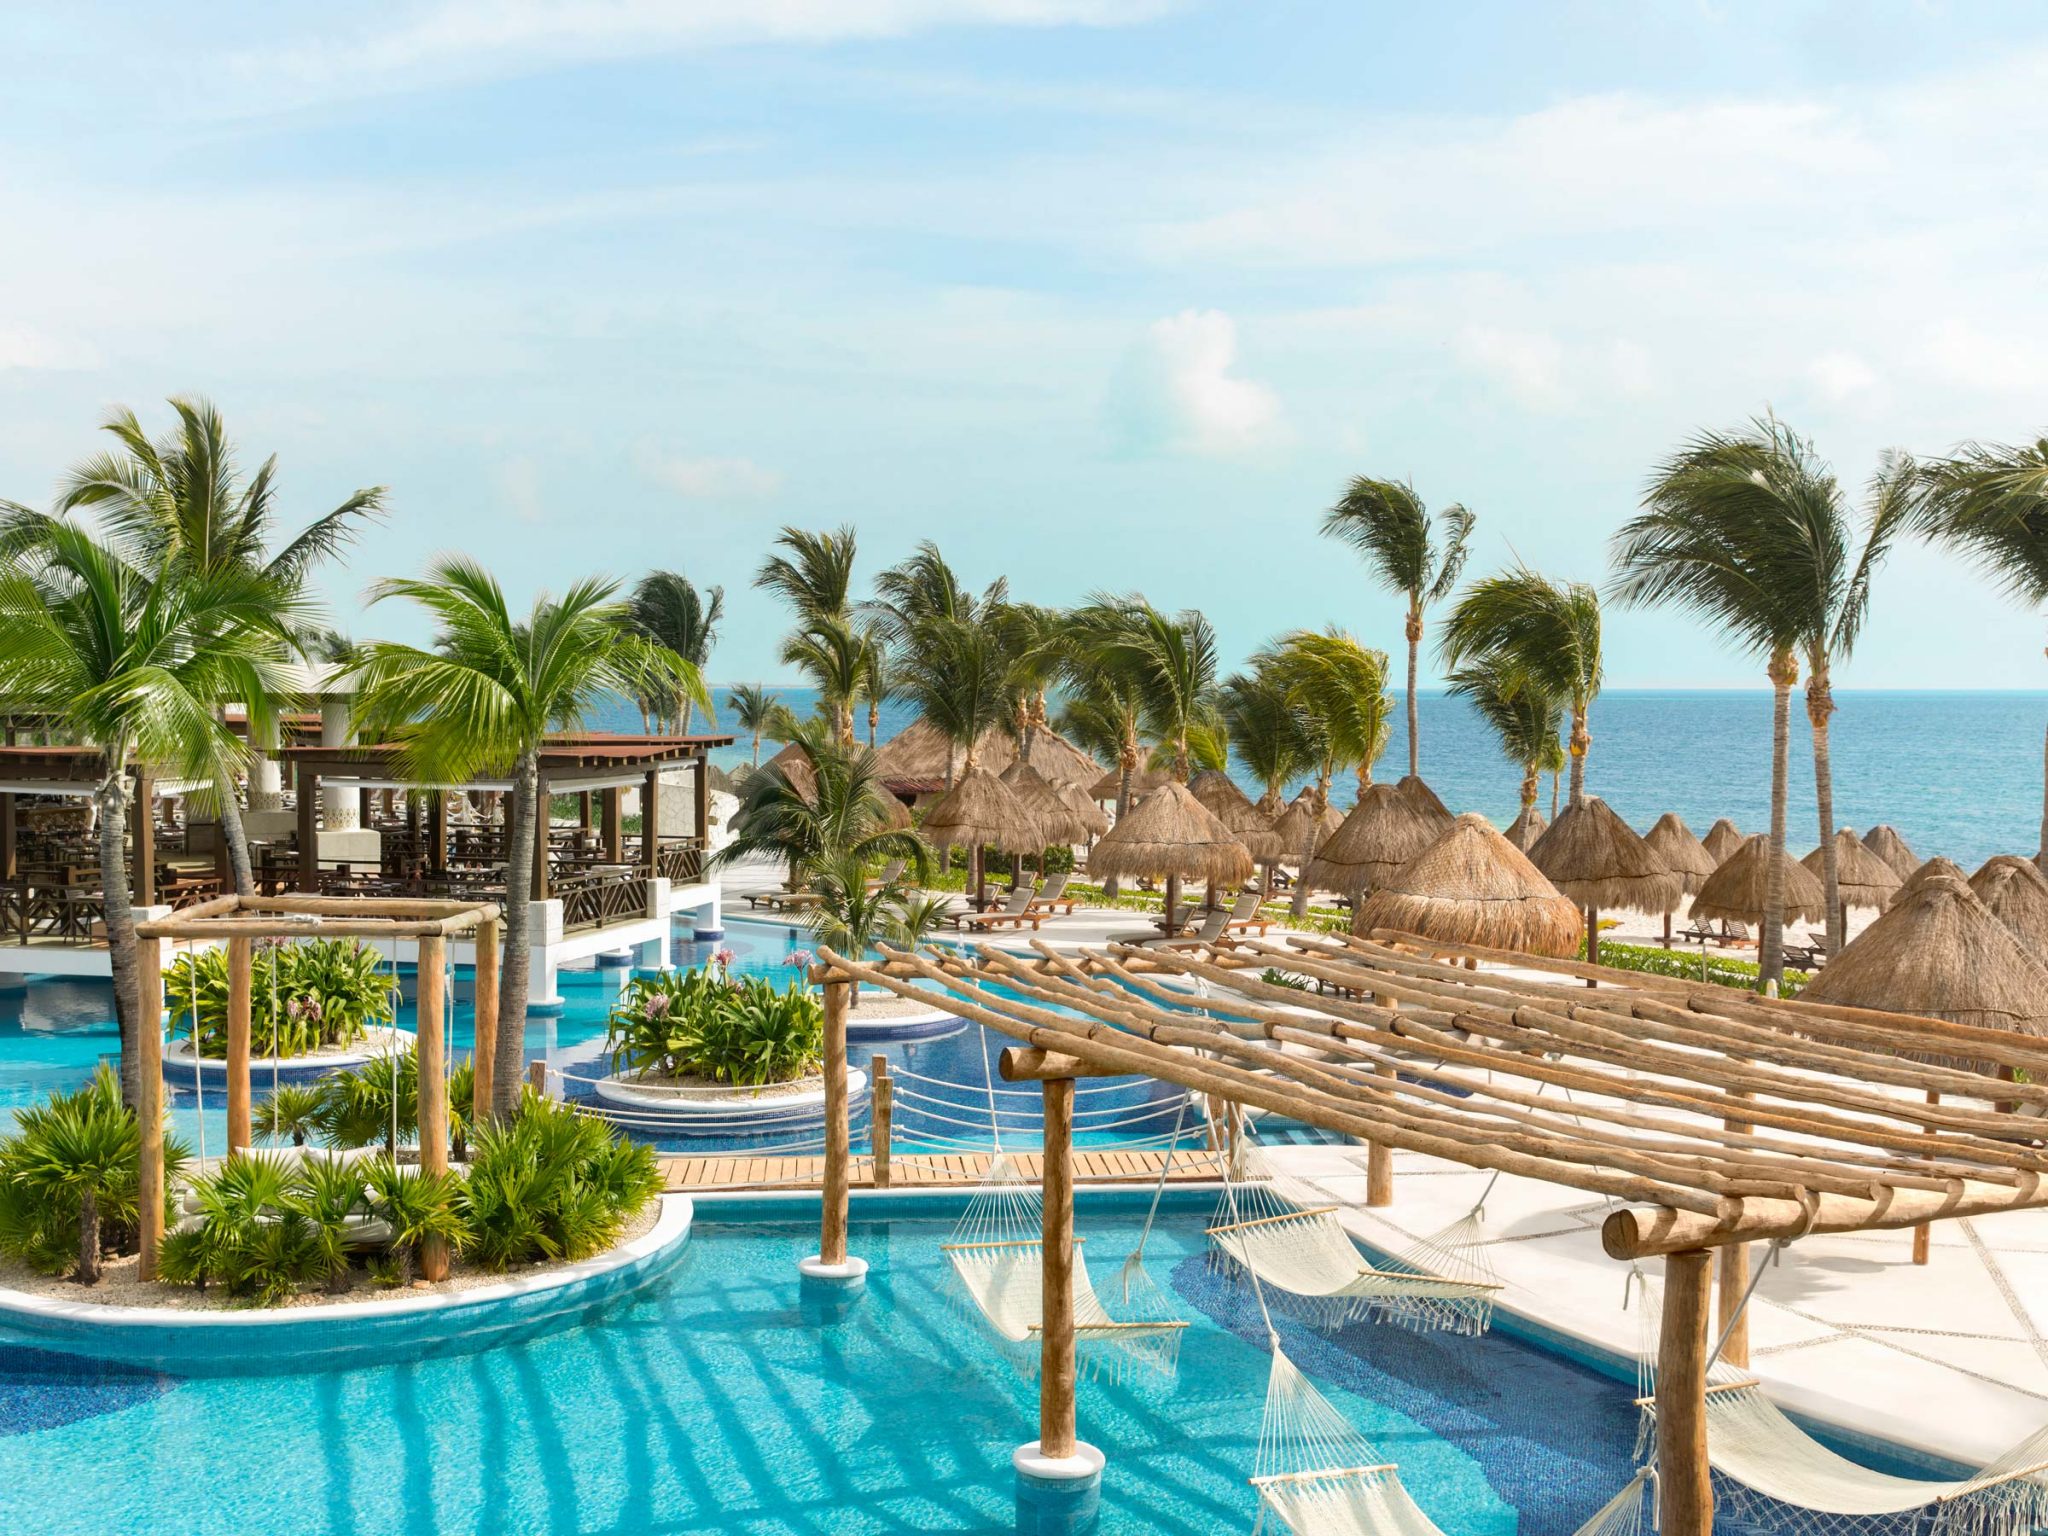 The 10 Best AdultsOnly AllInclusive Resorts in Mexico